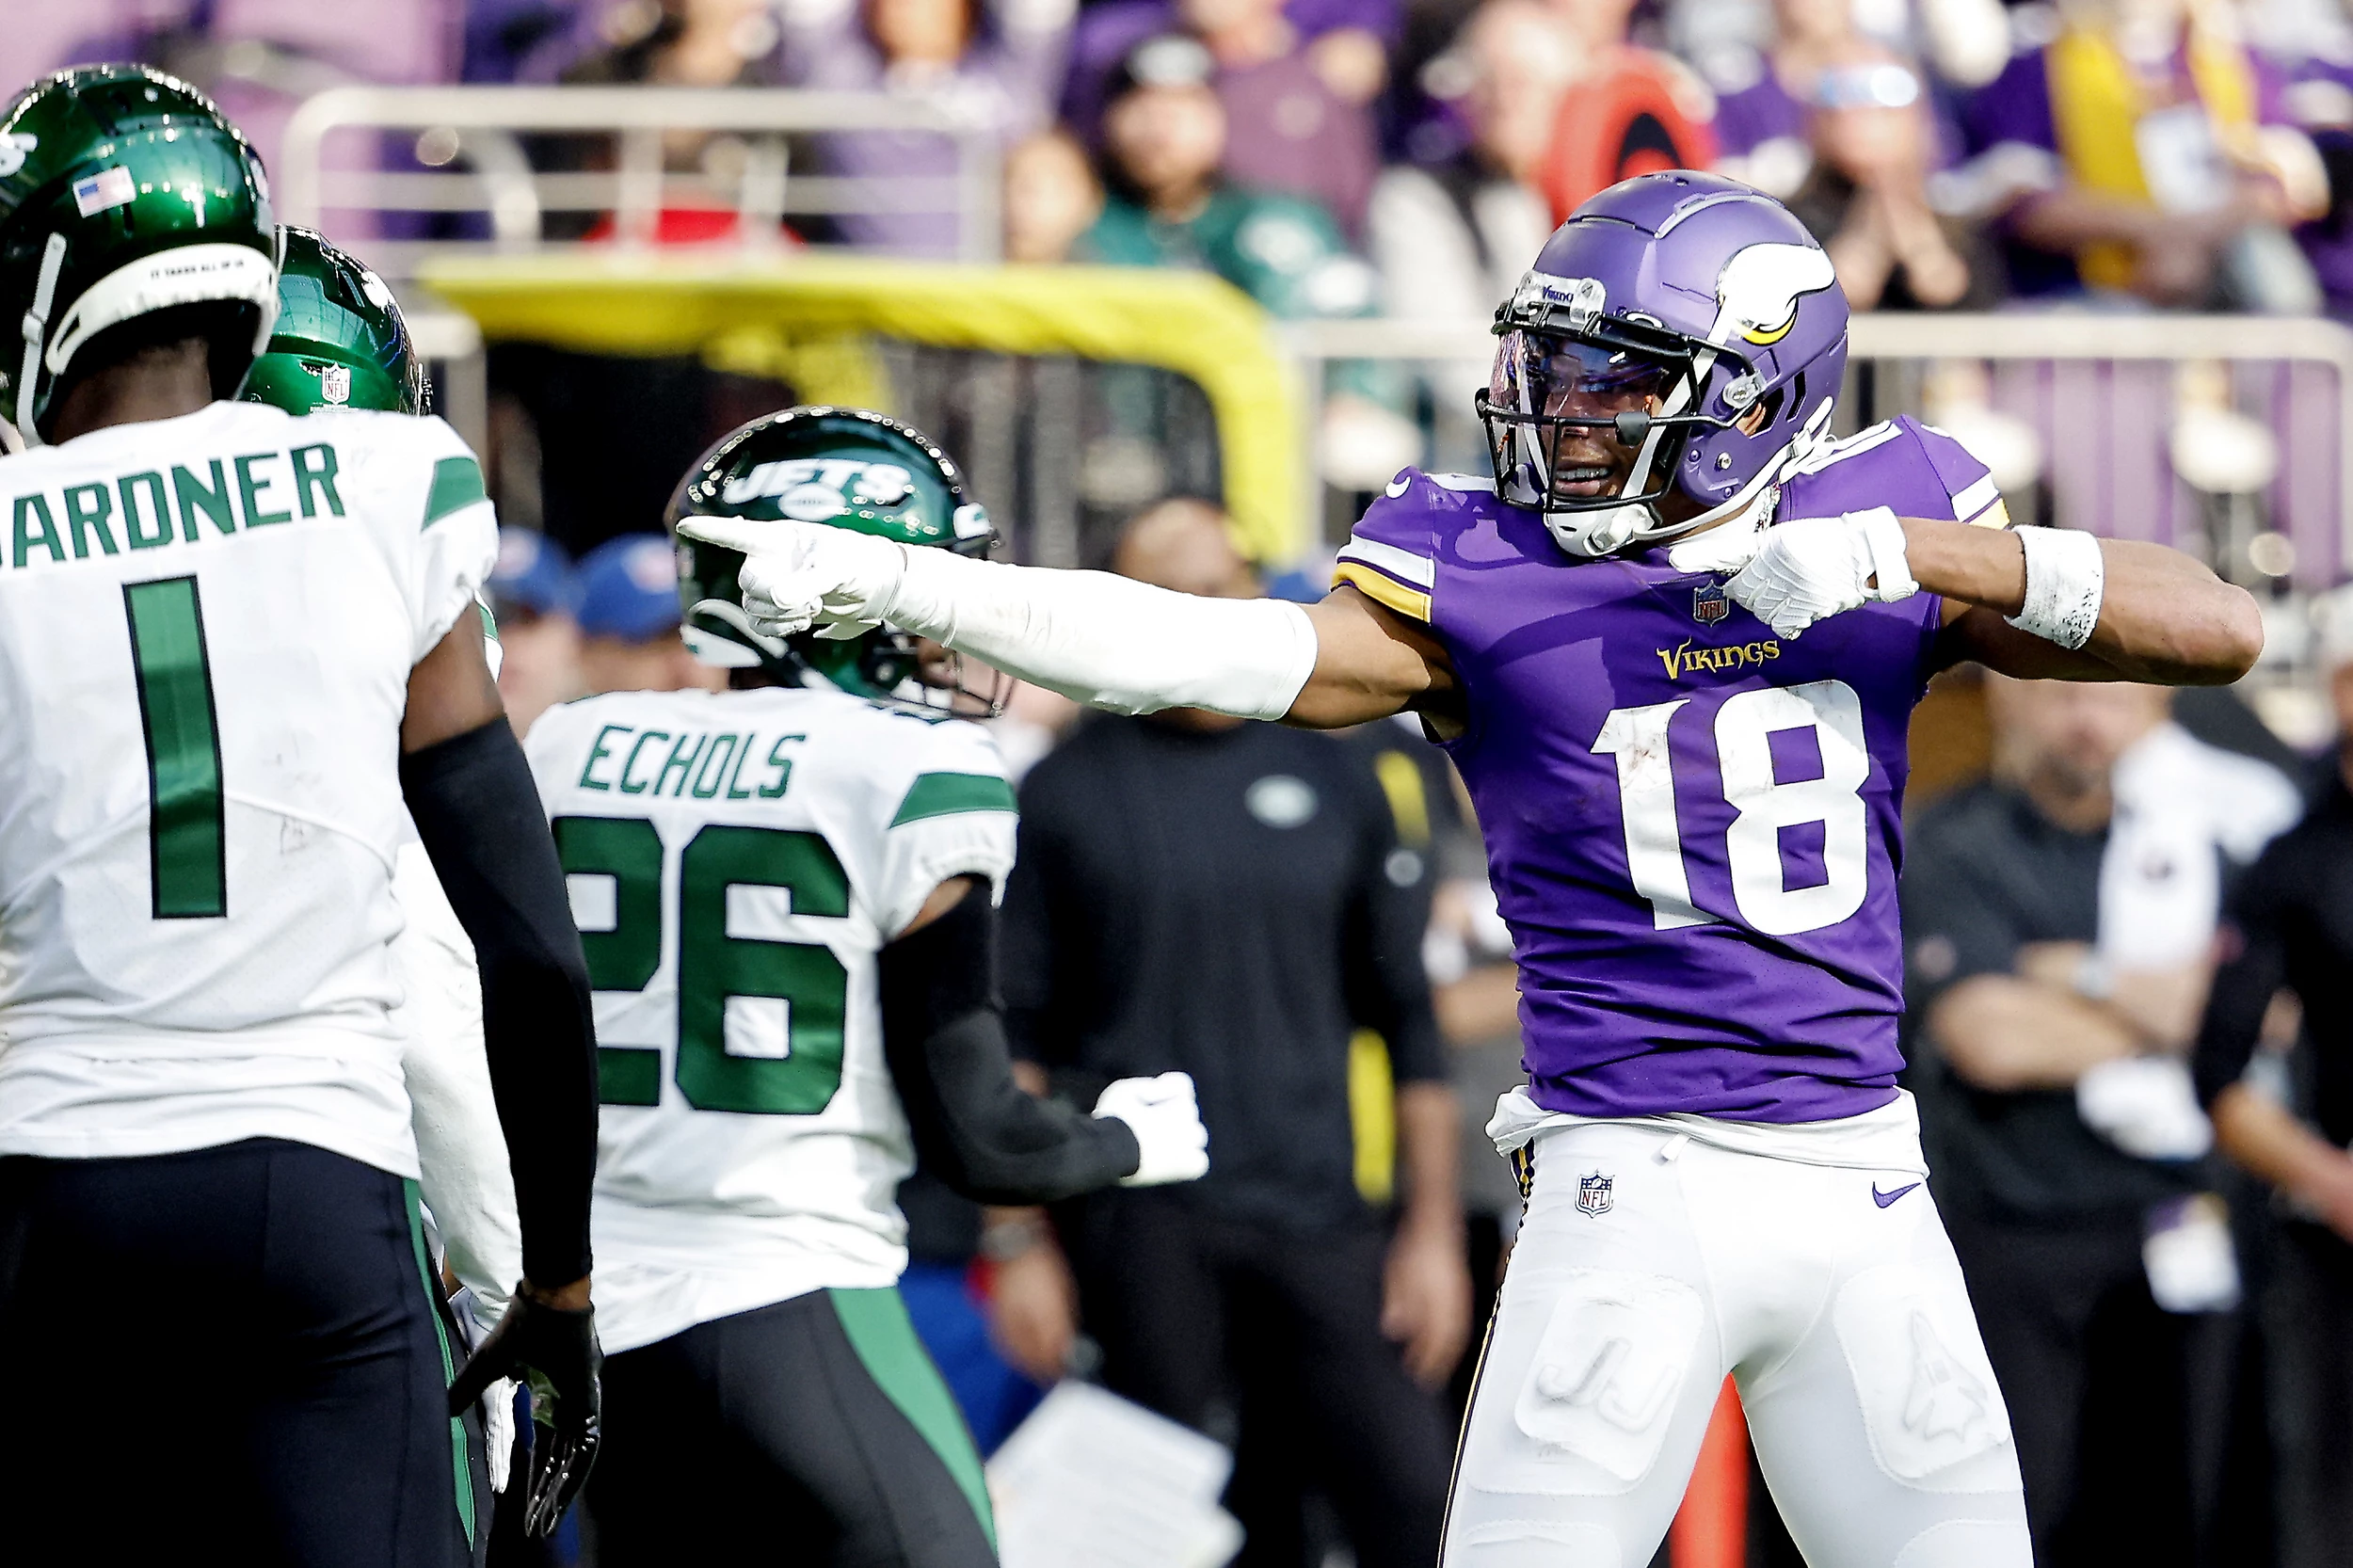 Vikings hang on for 27-22 victory over Jets